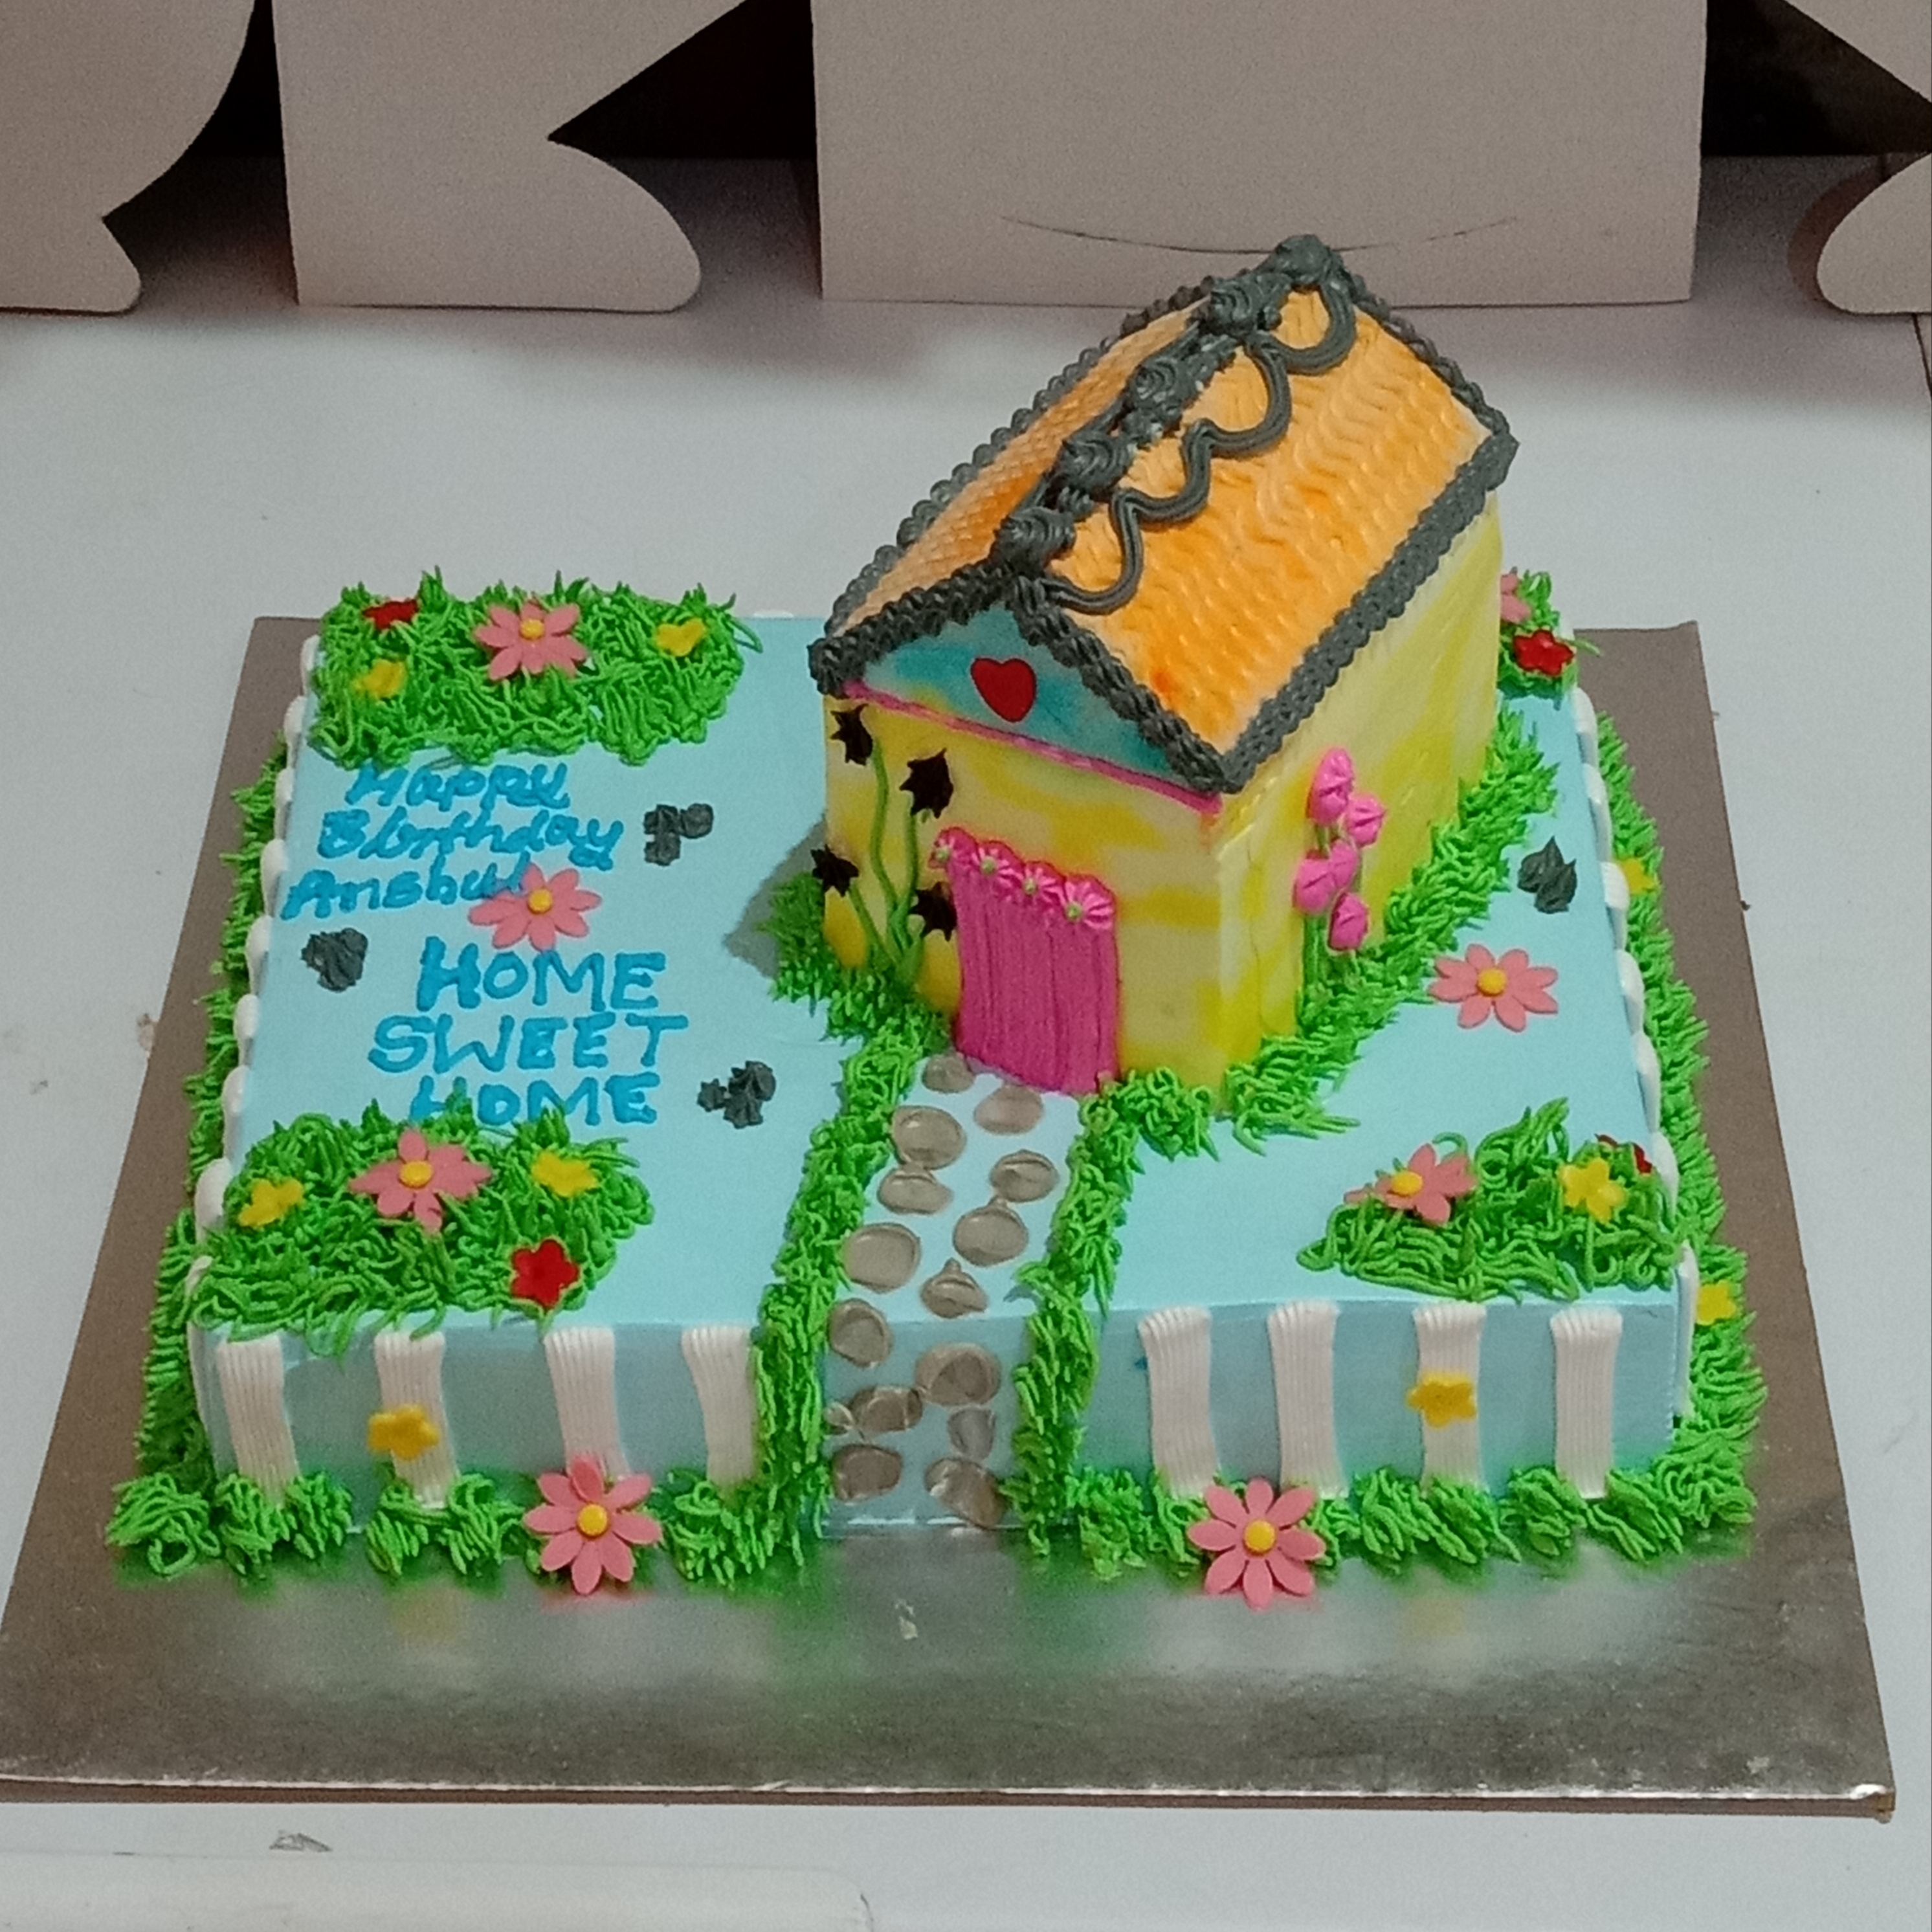 birthday cake with photo frame and name edit online